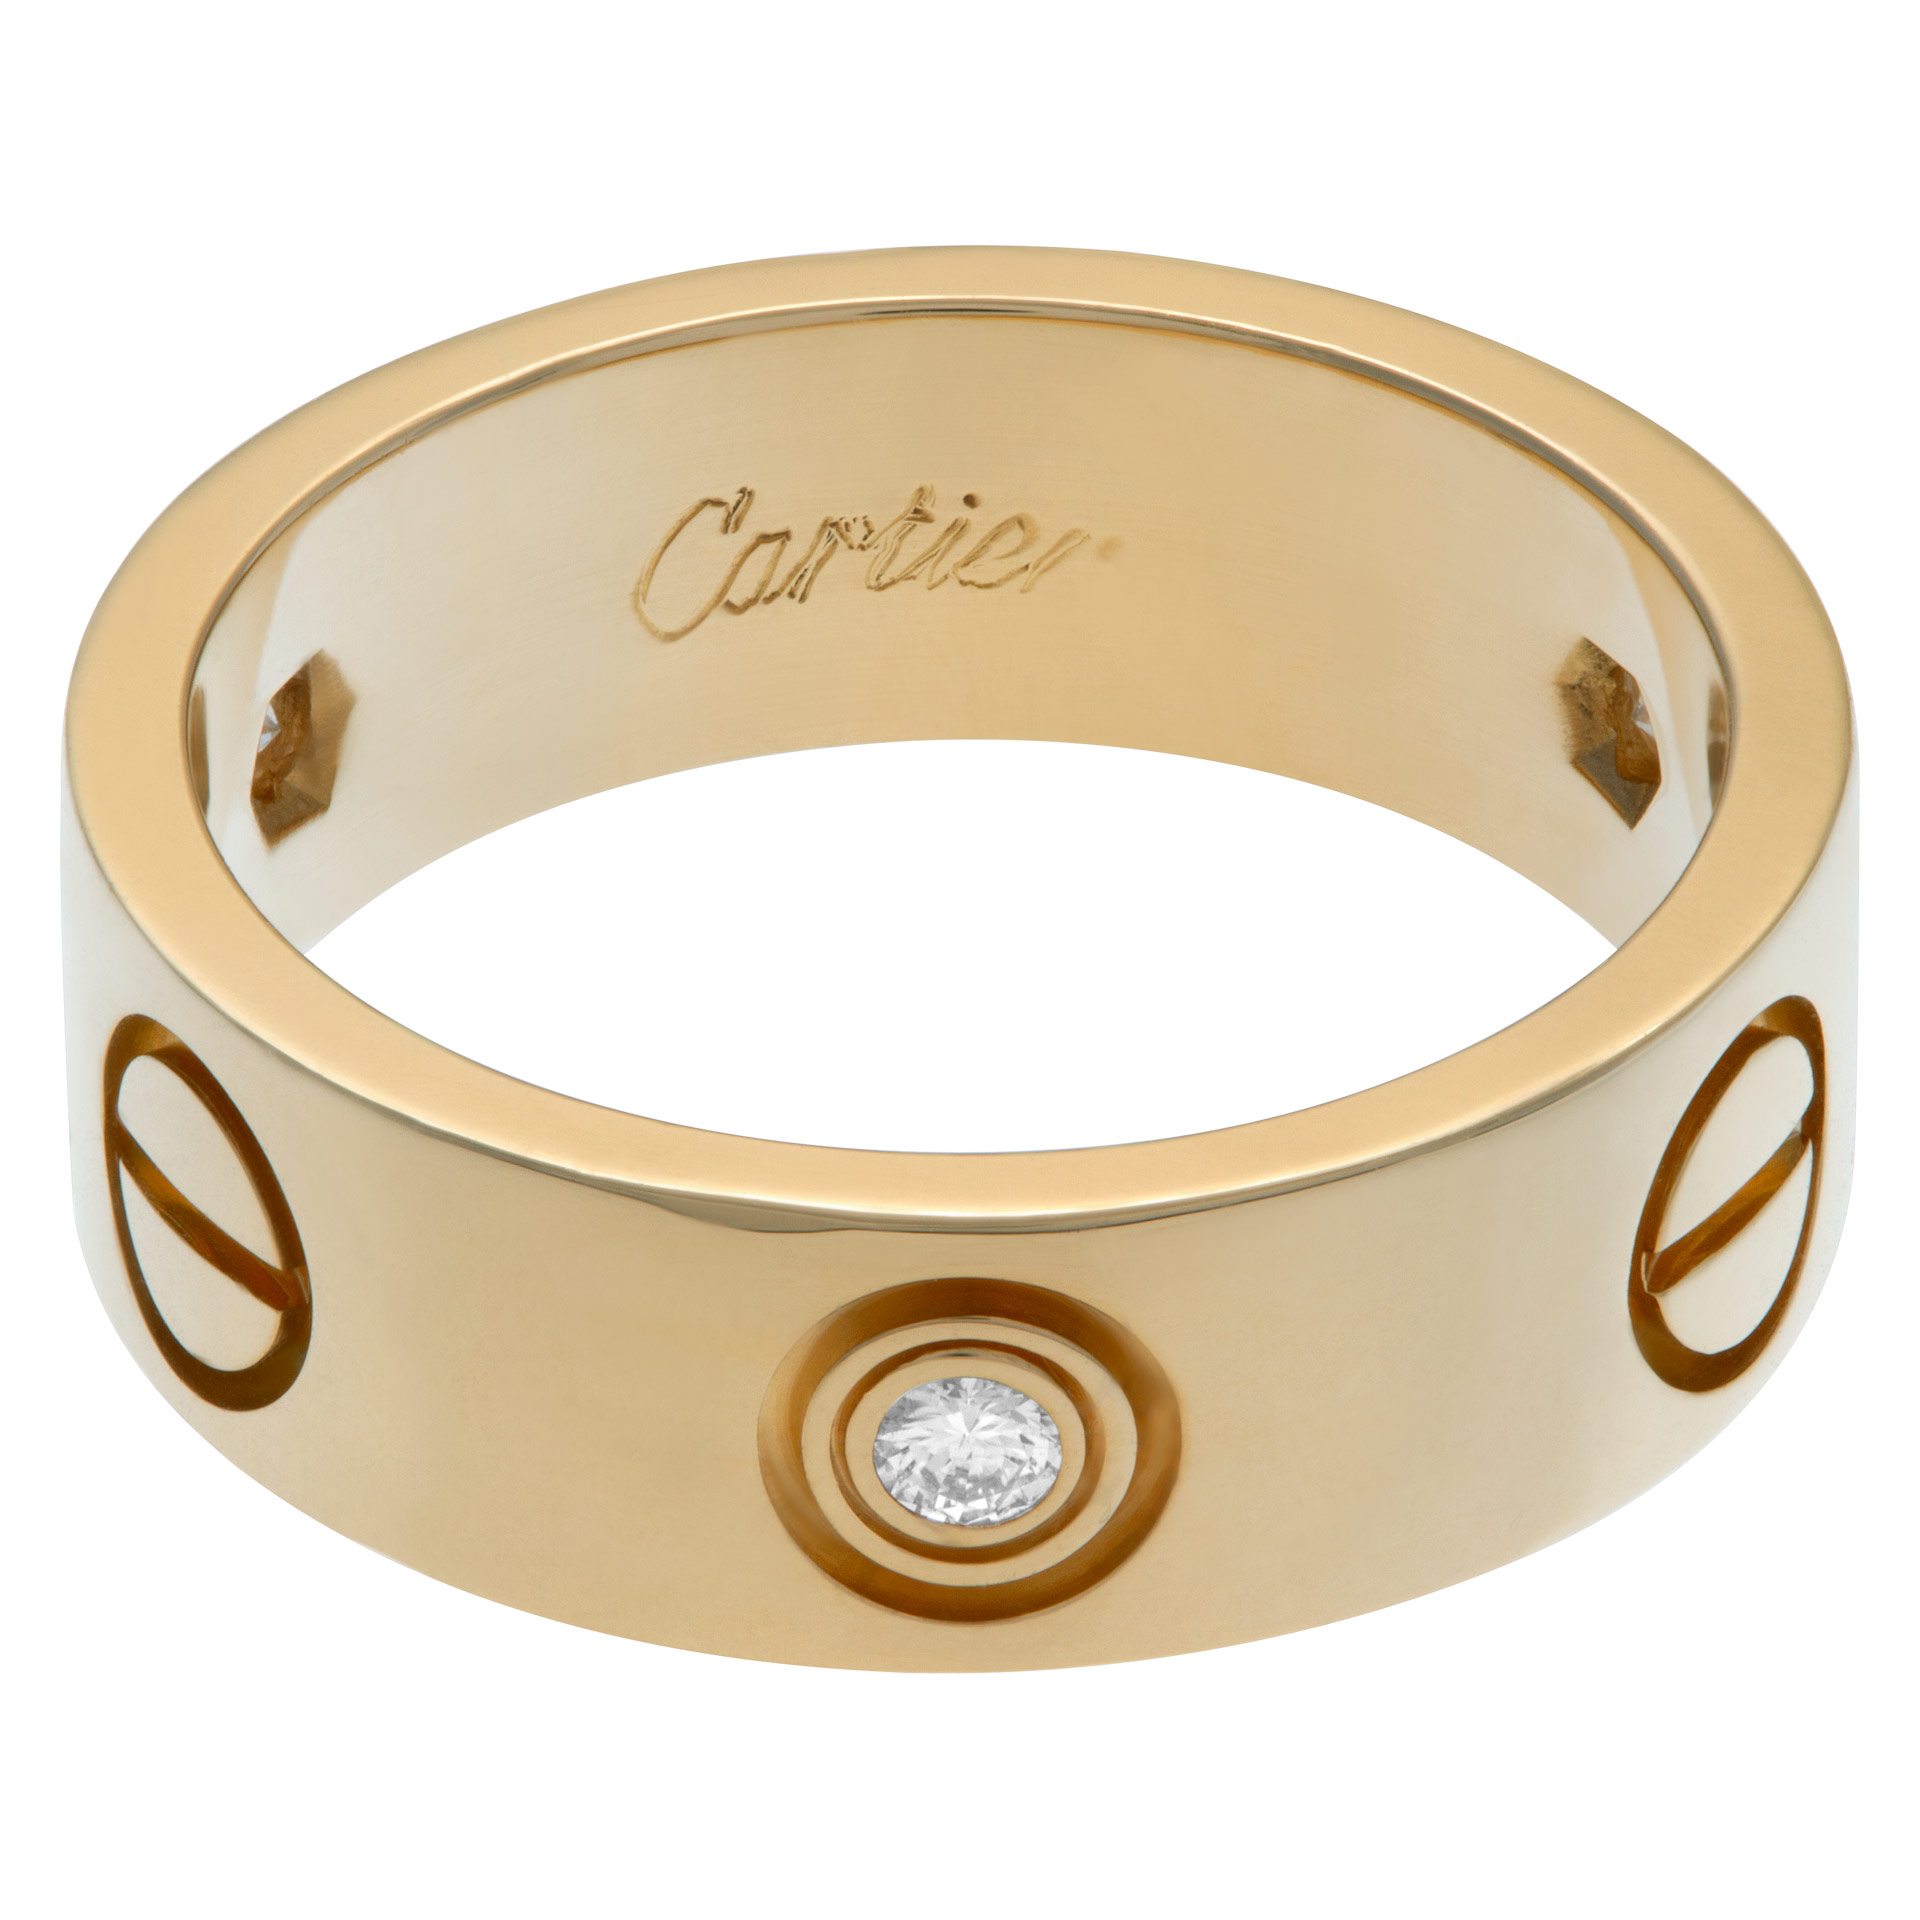 Ongekend Cartier Love ring in 18k yellow gold with 3 diamonds. Euro size 48 (US BV-63